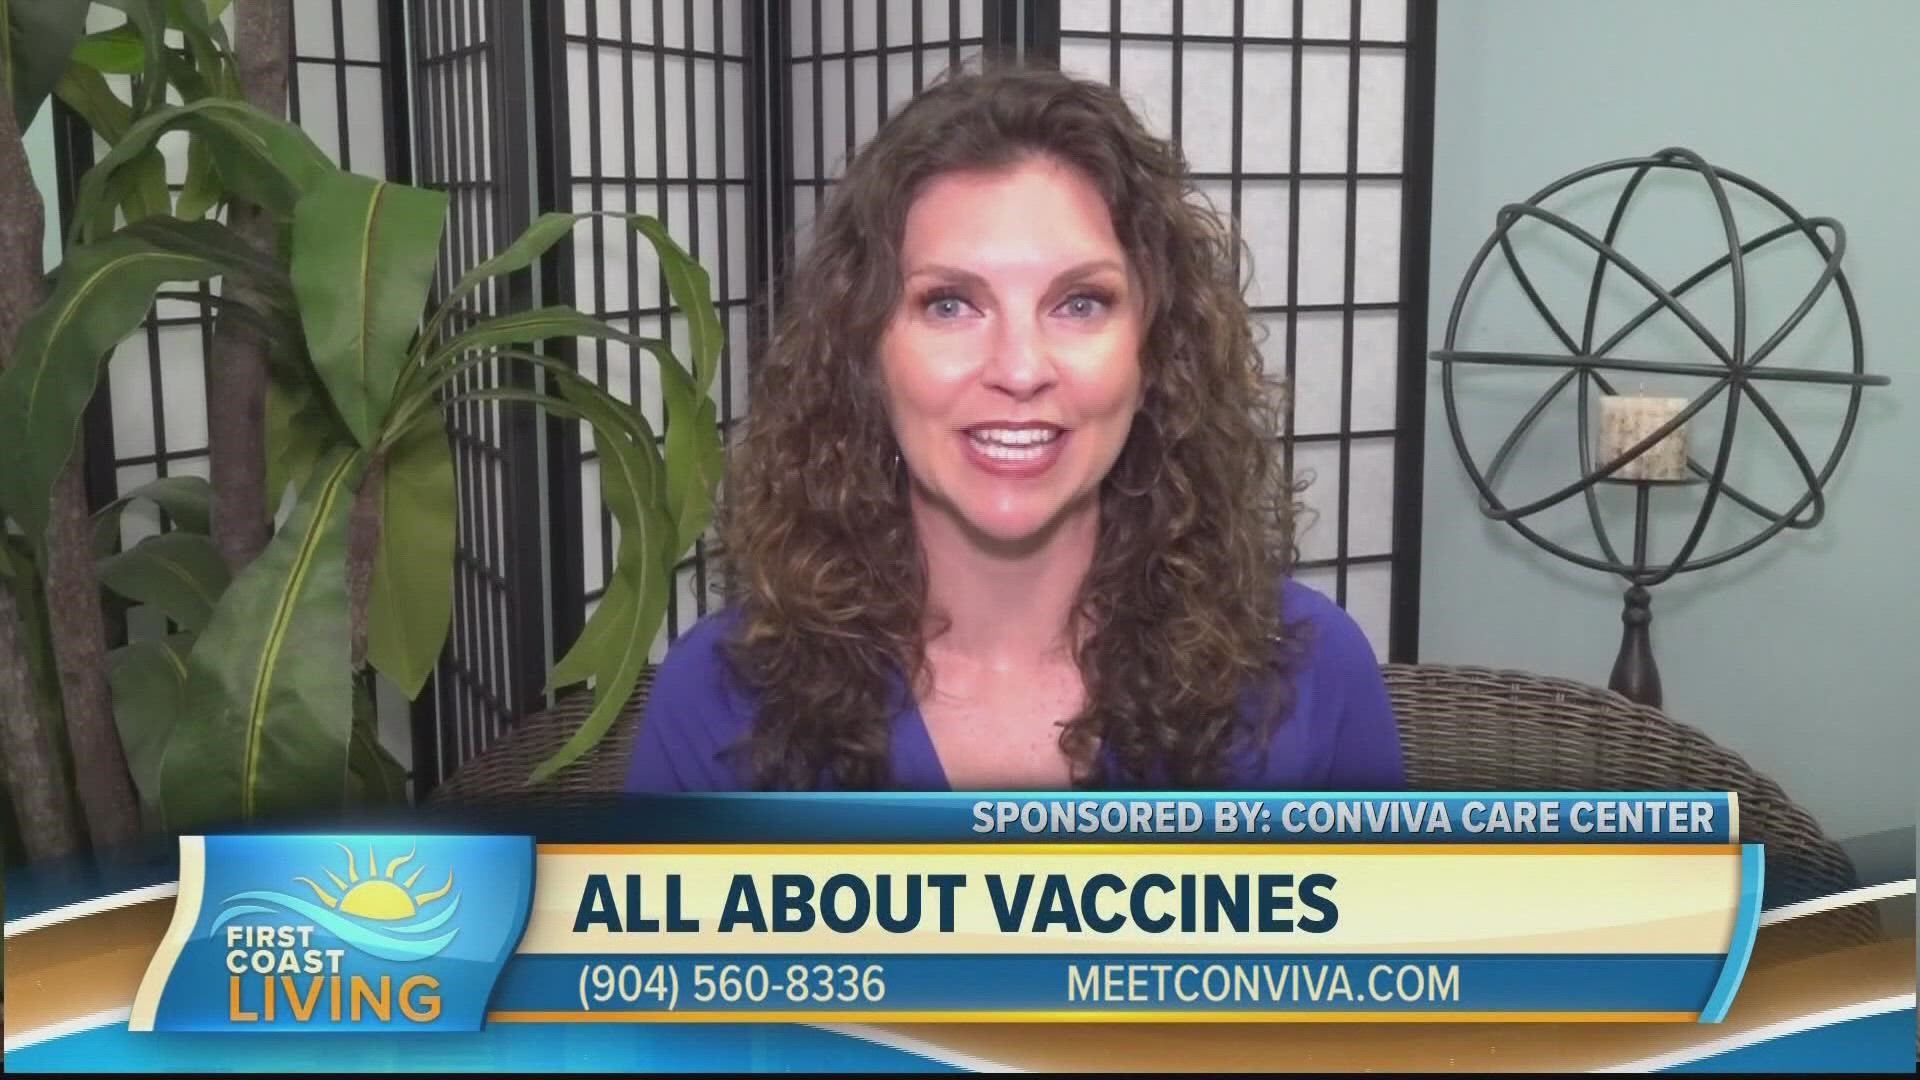 Conviva Care Center shares the importance of all vaccines for older adults, as well as vaccine myths and misconceptions.